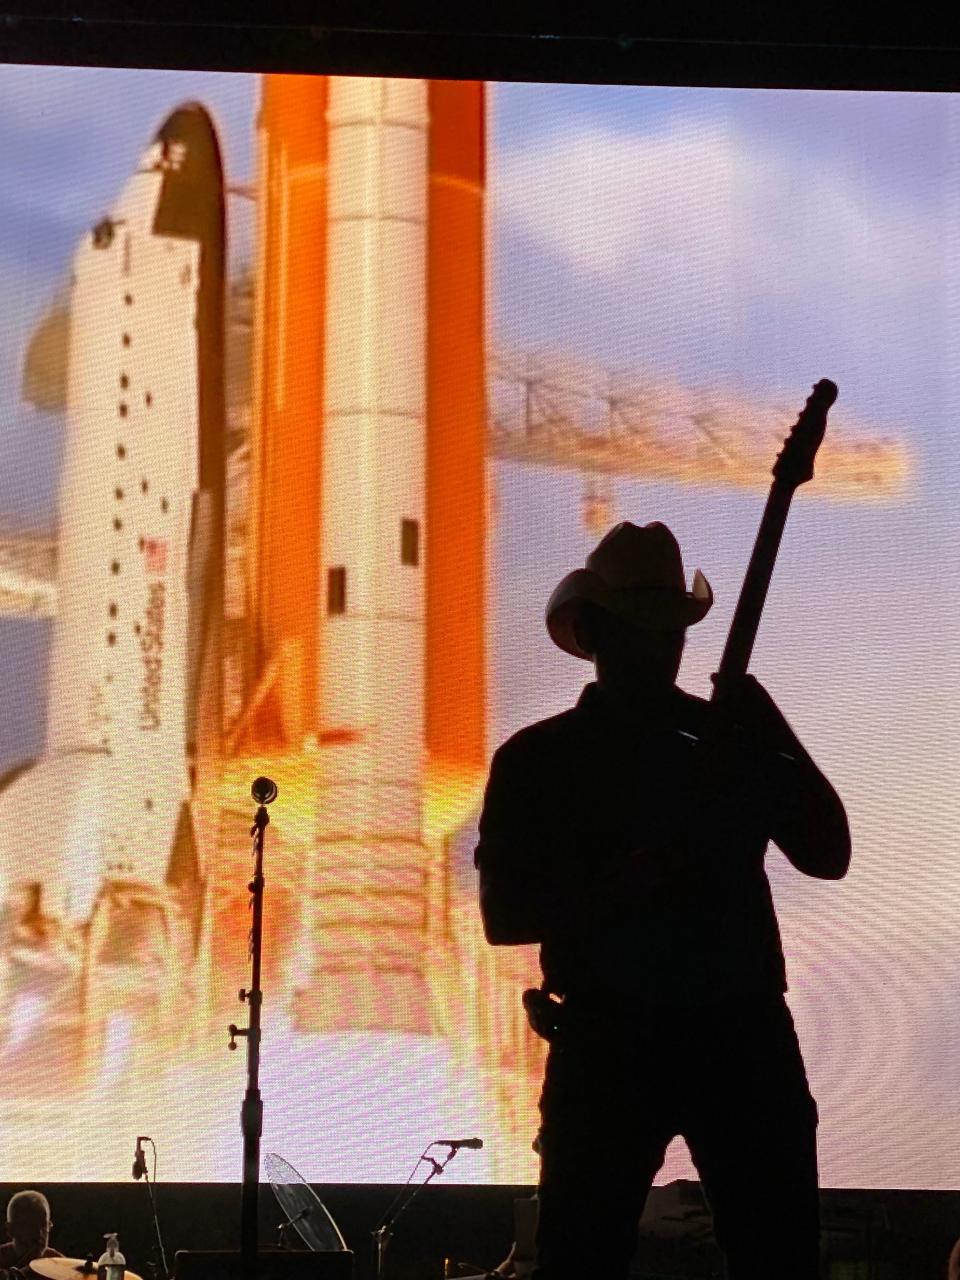 Brad Paisley performed at the 2021 Concert for Legends in Canton amid a video backdrop of the Space Shuttle. Paisley headlined the concert at Tom Benson Hall of Fame Stadium.